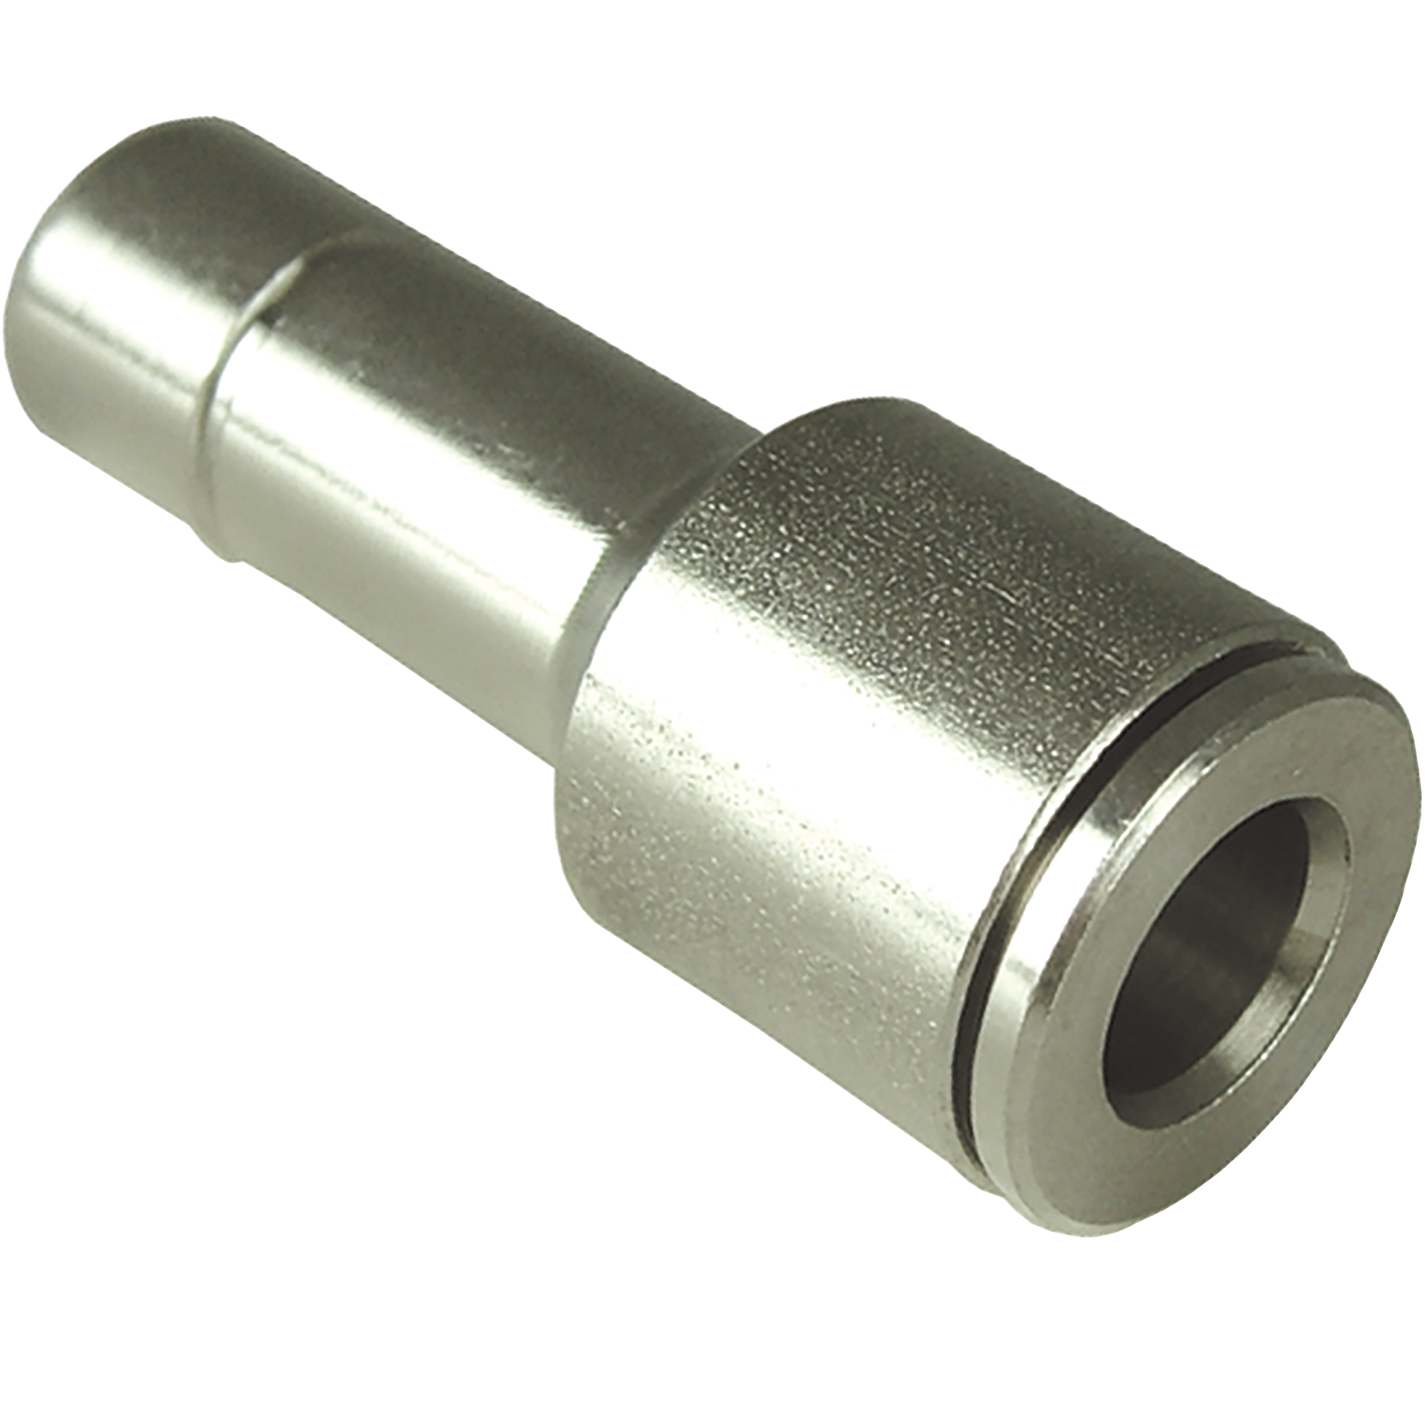 6MM TO 4MM REDUCER